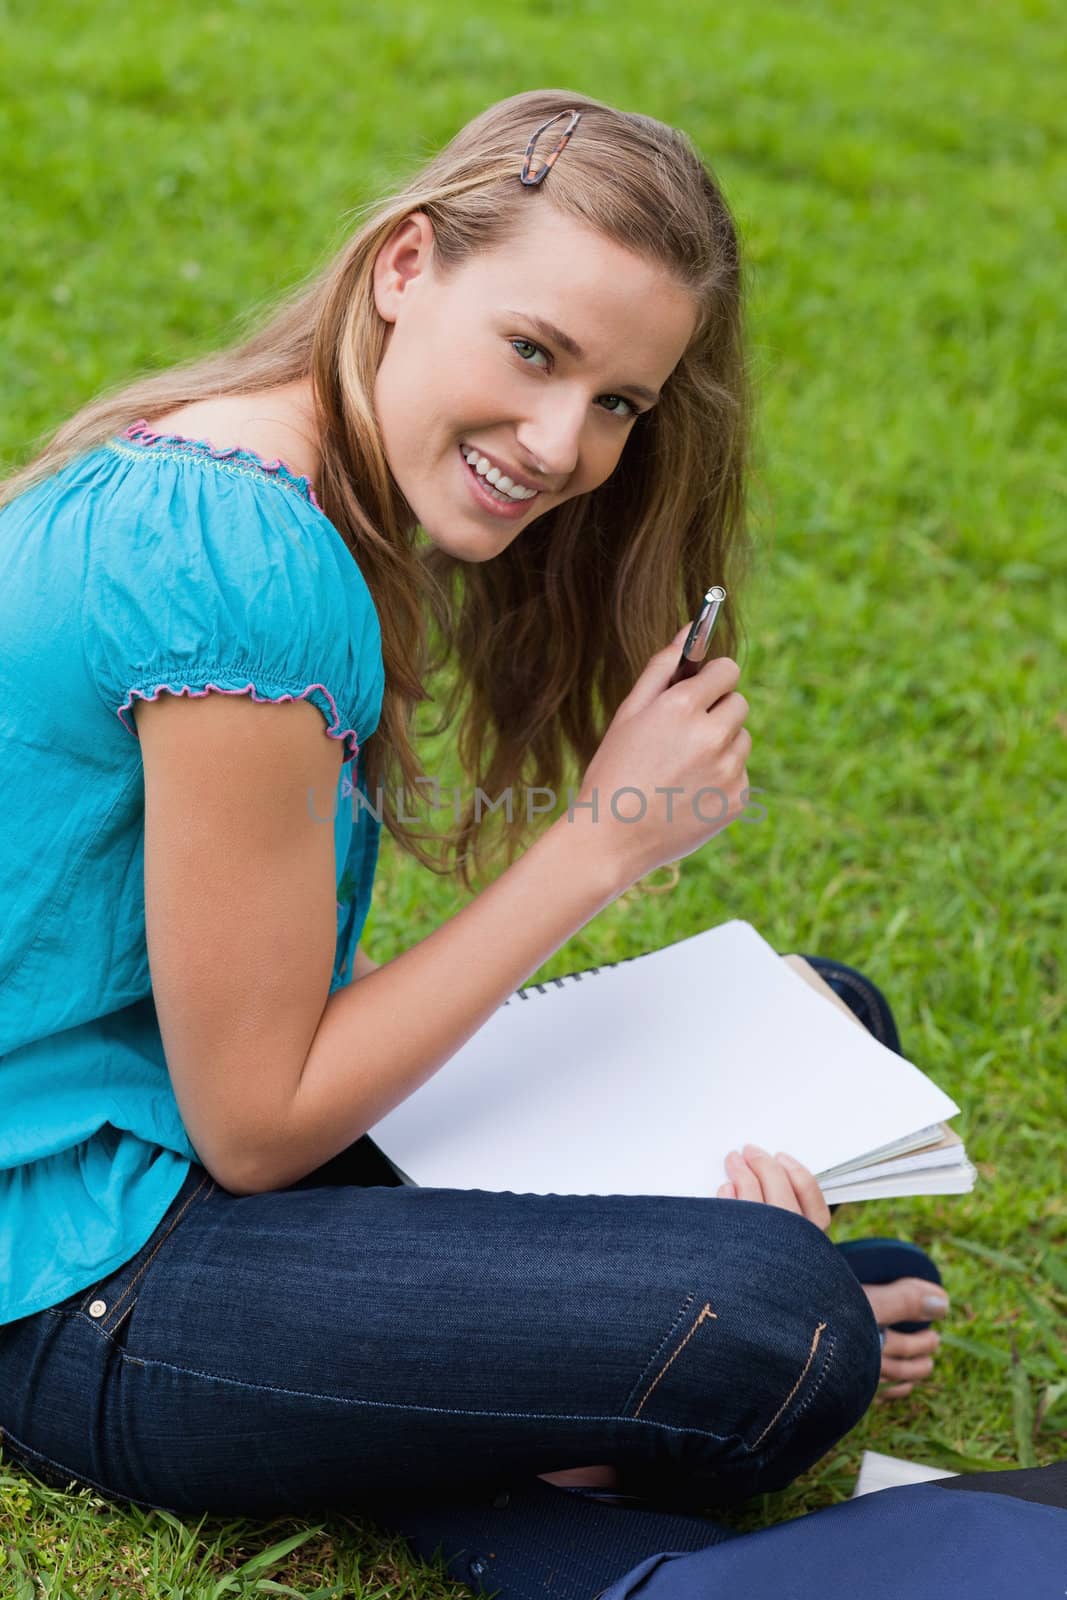 Smiling attractive girl holding her pen while looking straight at the camera